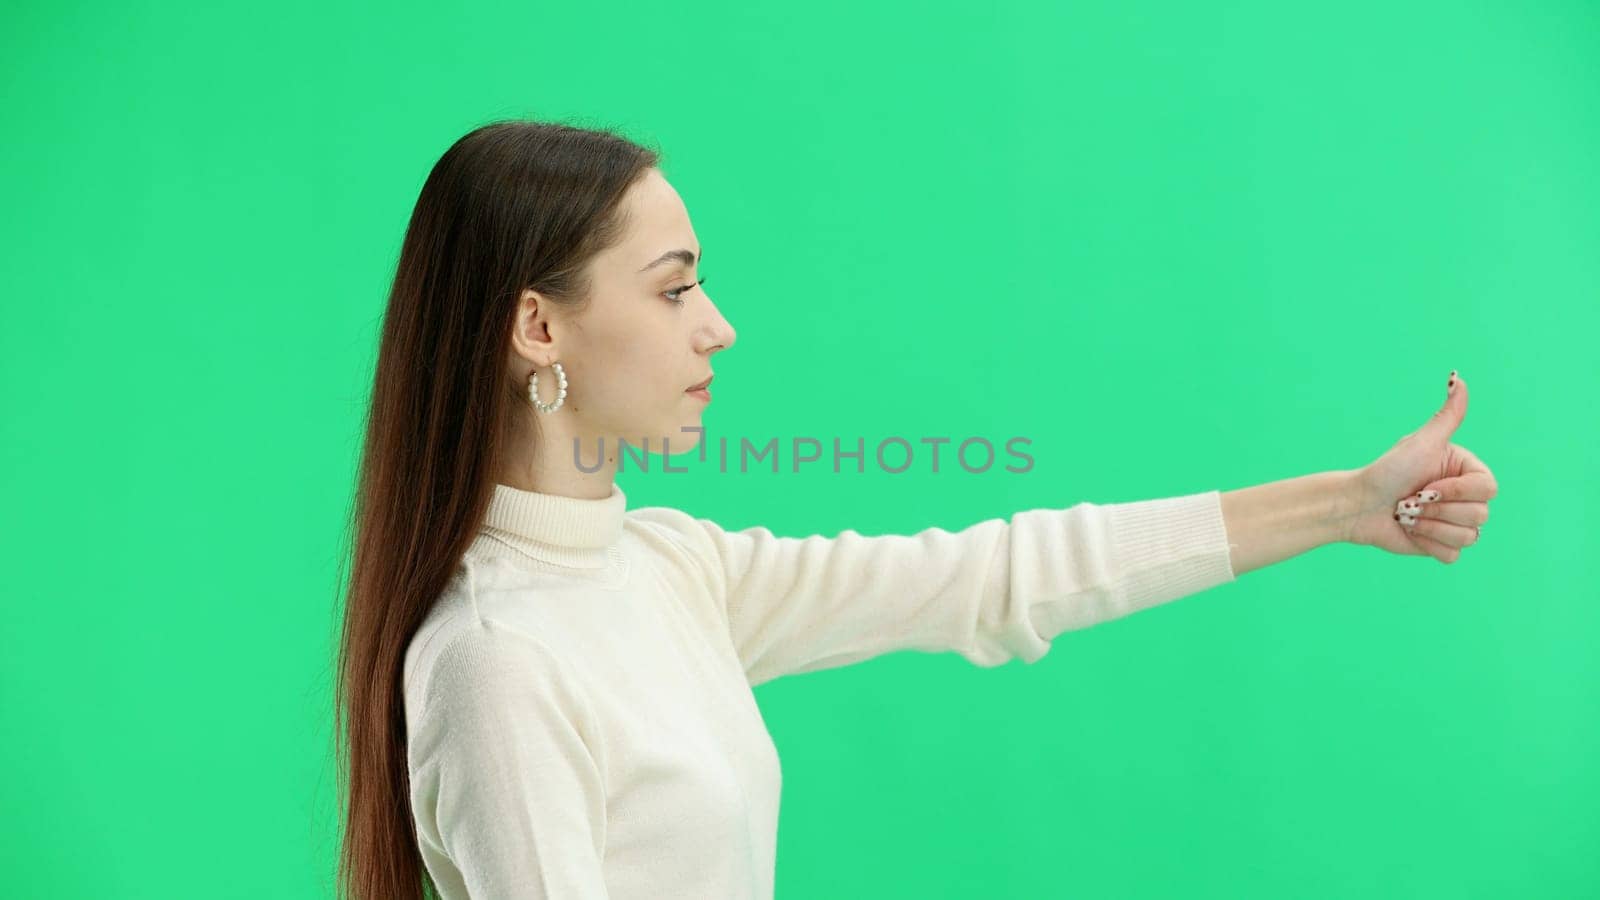 A woman, close-up, on a green background, shows her thumbs up by Prosto